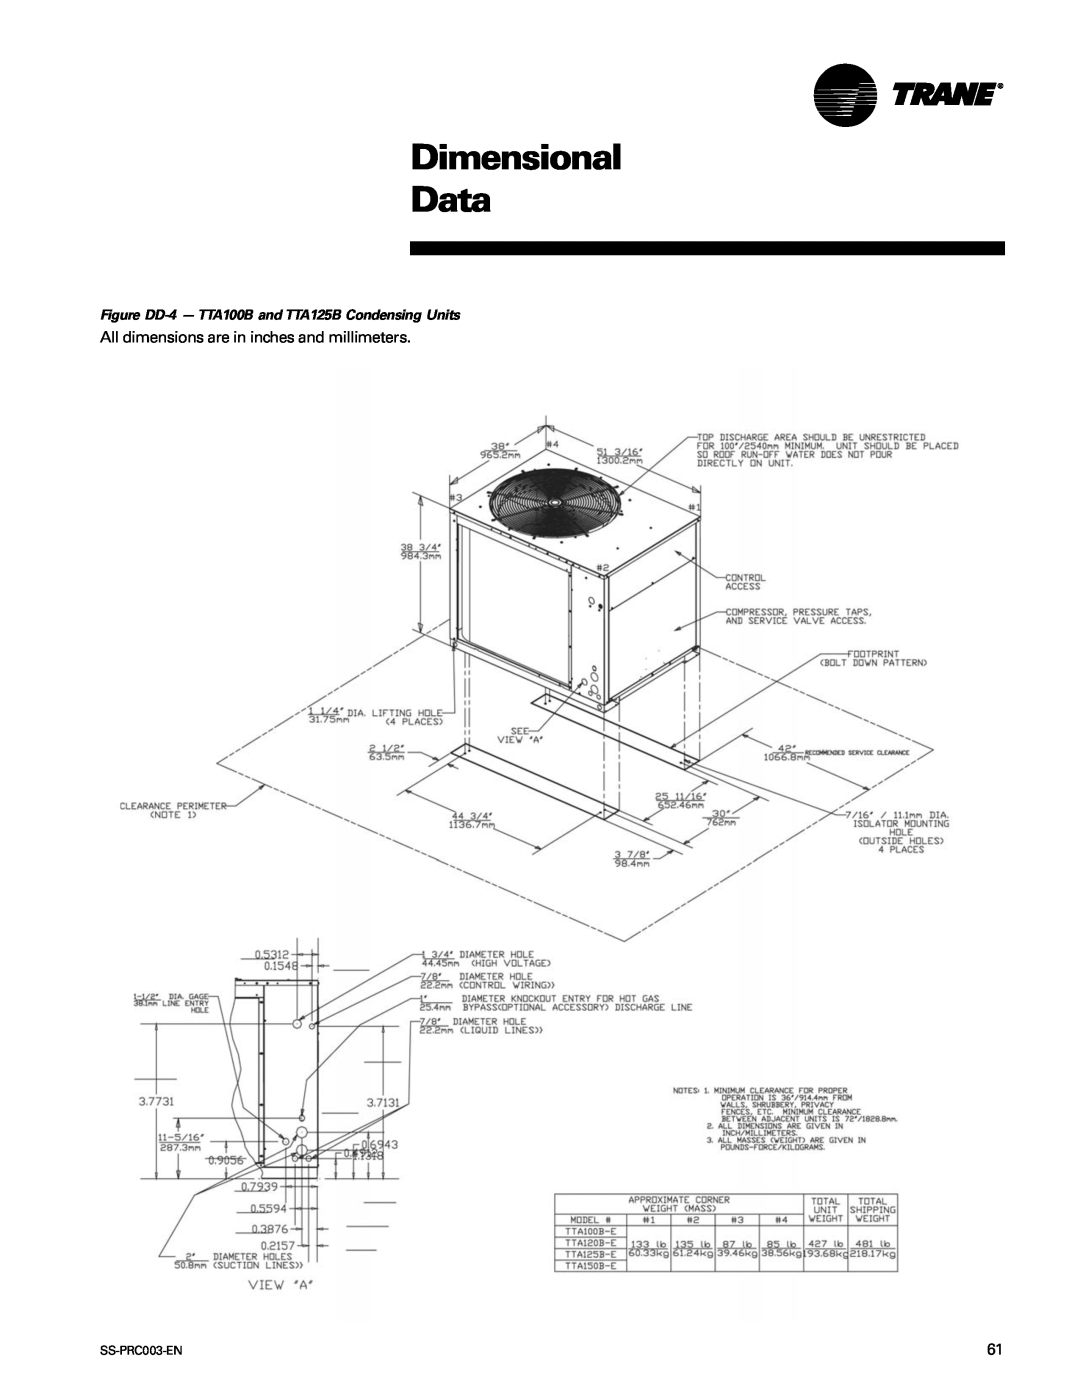 Trane SS-PRC003-EN manual Dimensional Data, All dimensions are in inches and millimeters 